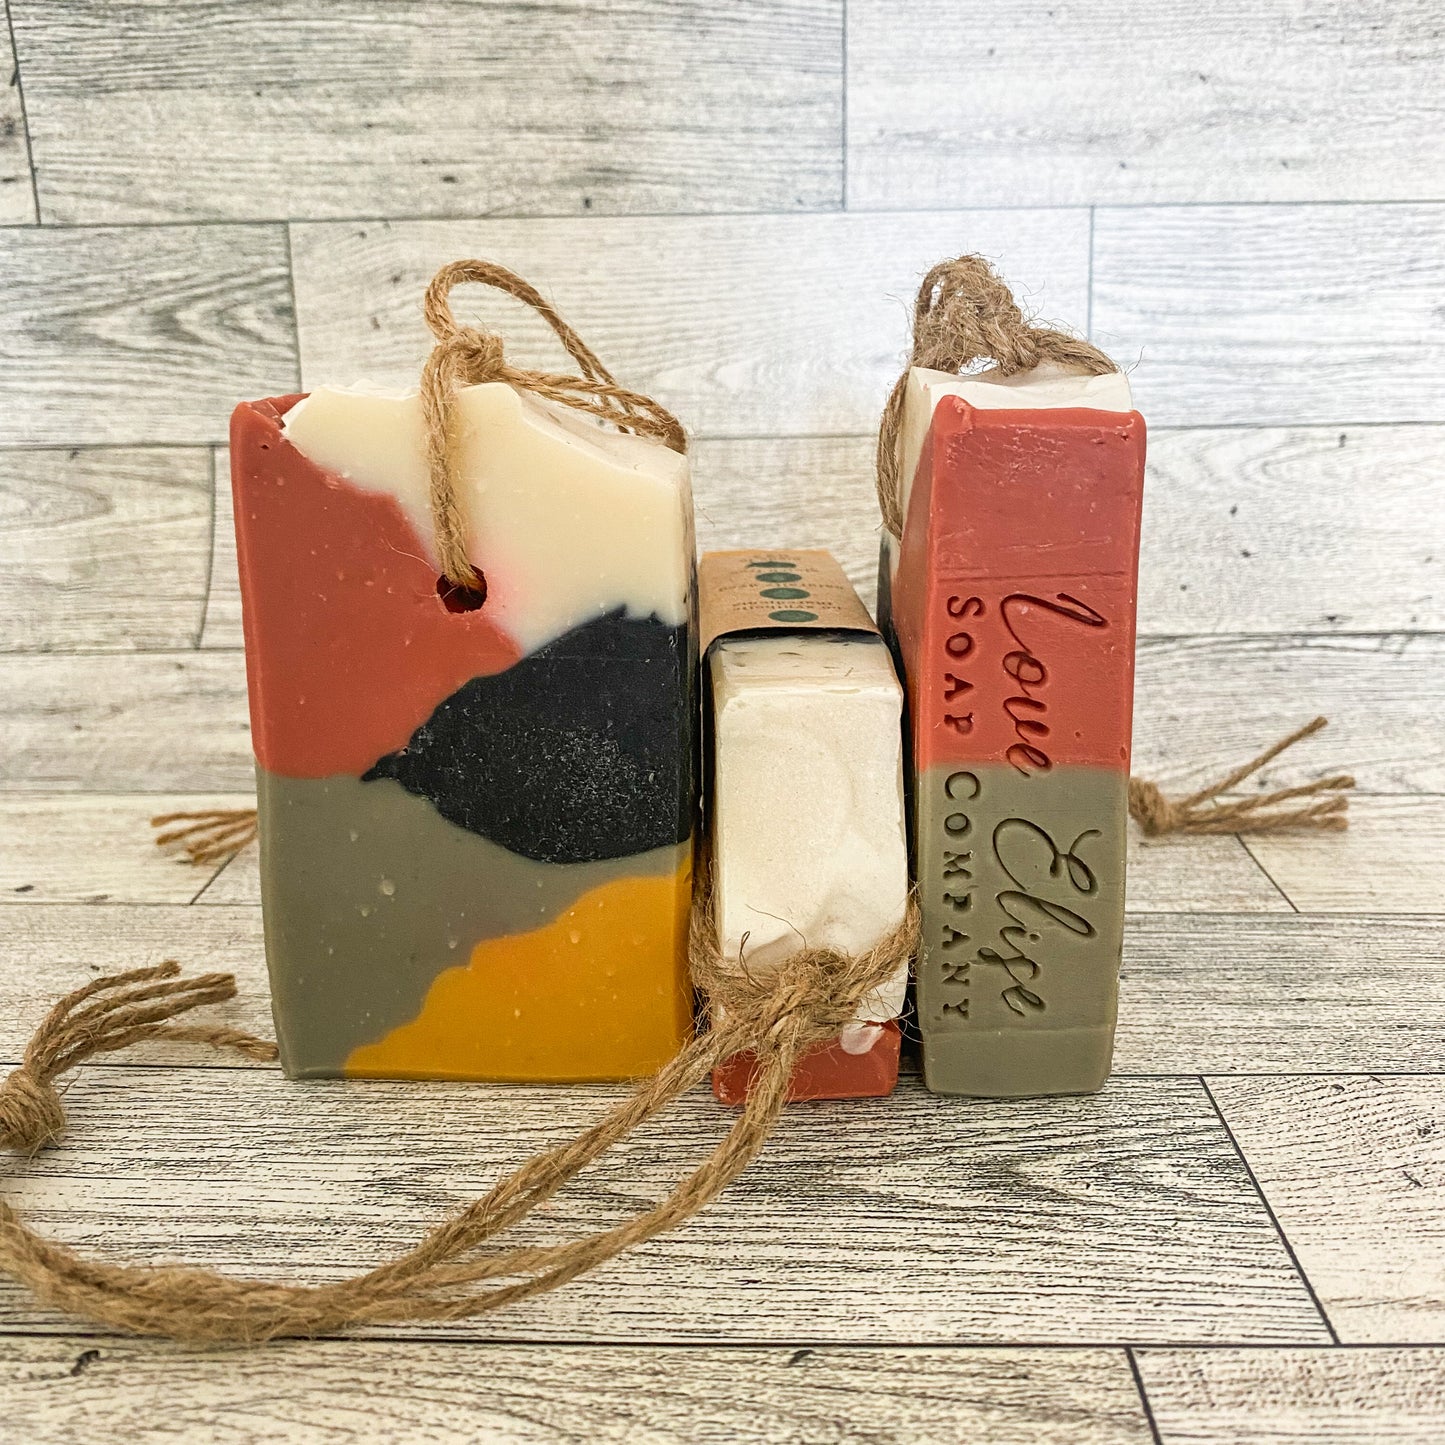 Color block on a Rope bar soap